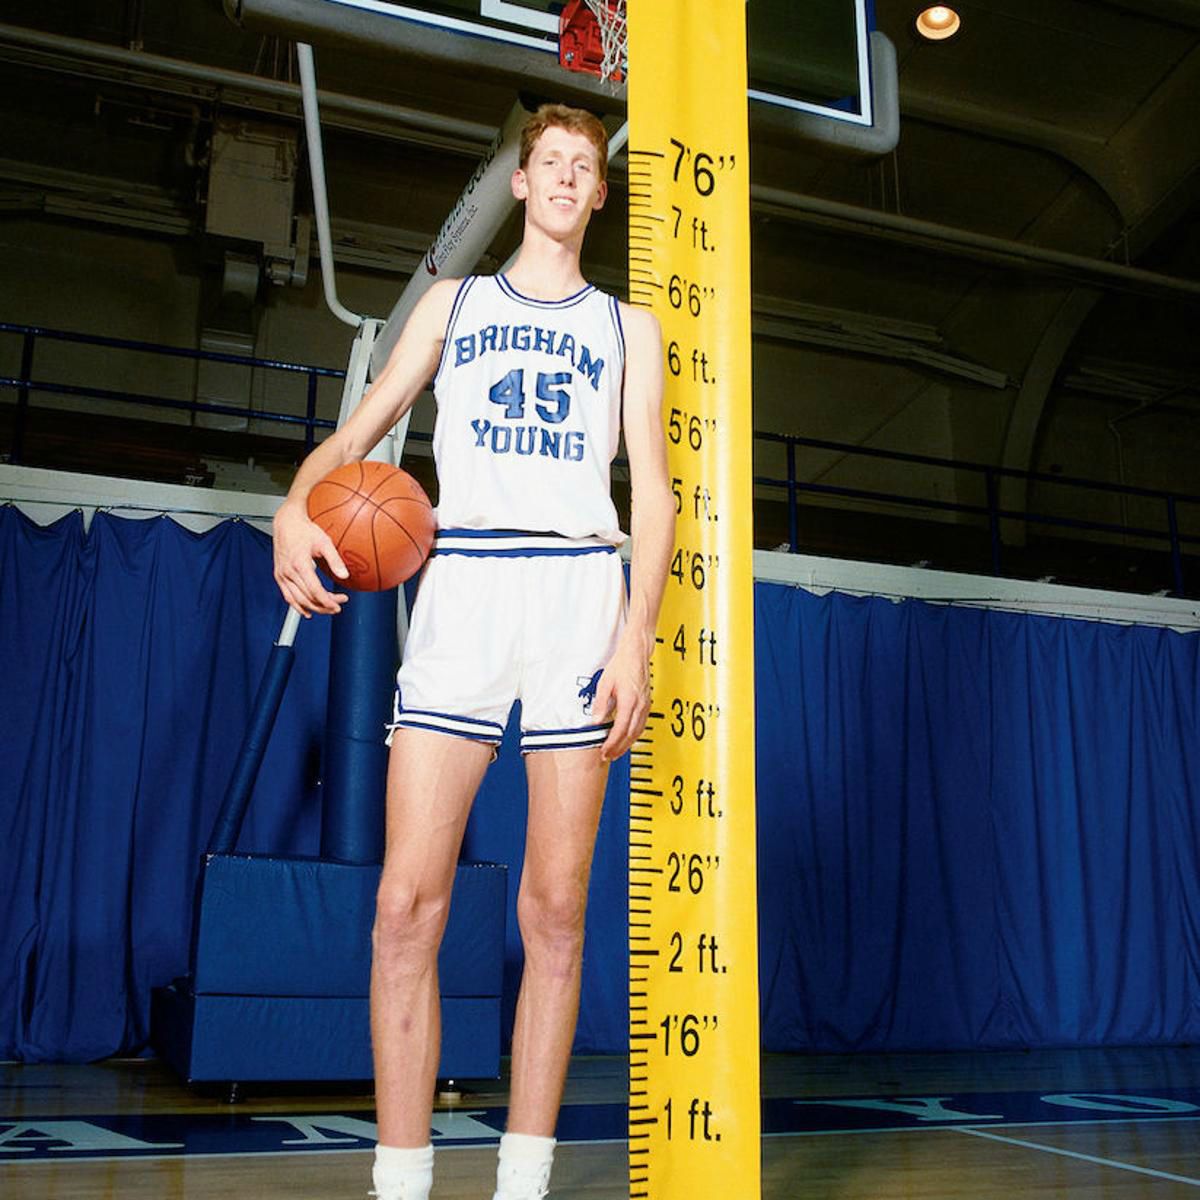 Annette Evertson's husband Shawn measuring his height